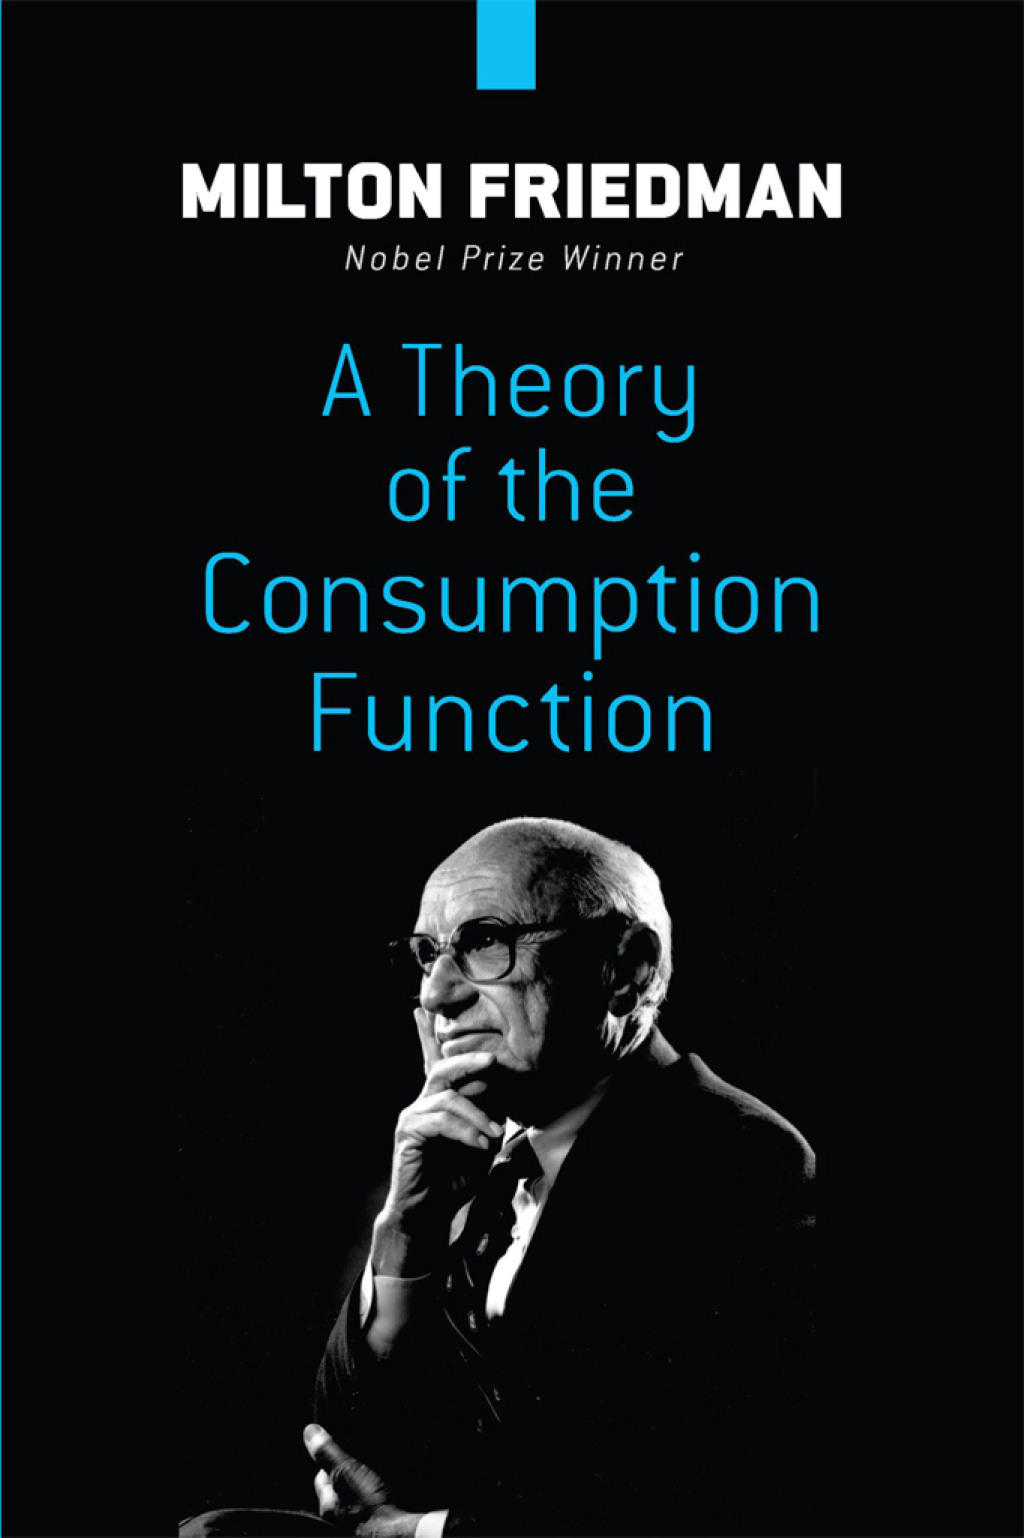 A Theory of the Consumption Function (eBook) - Milton Friedman,